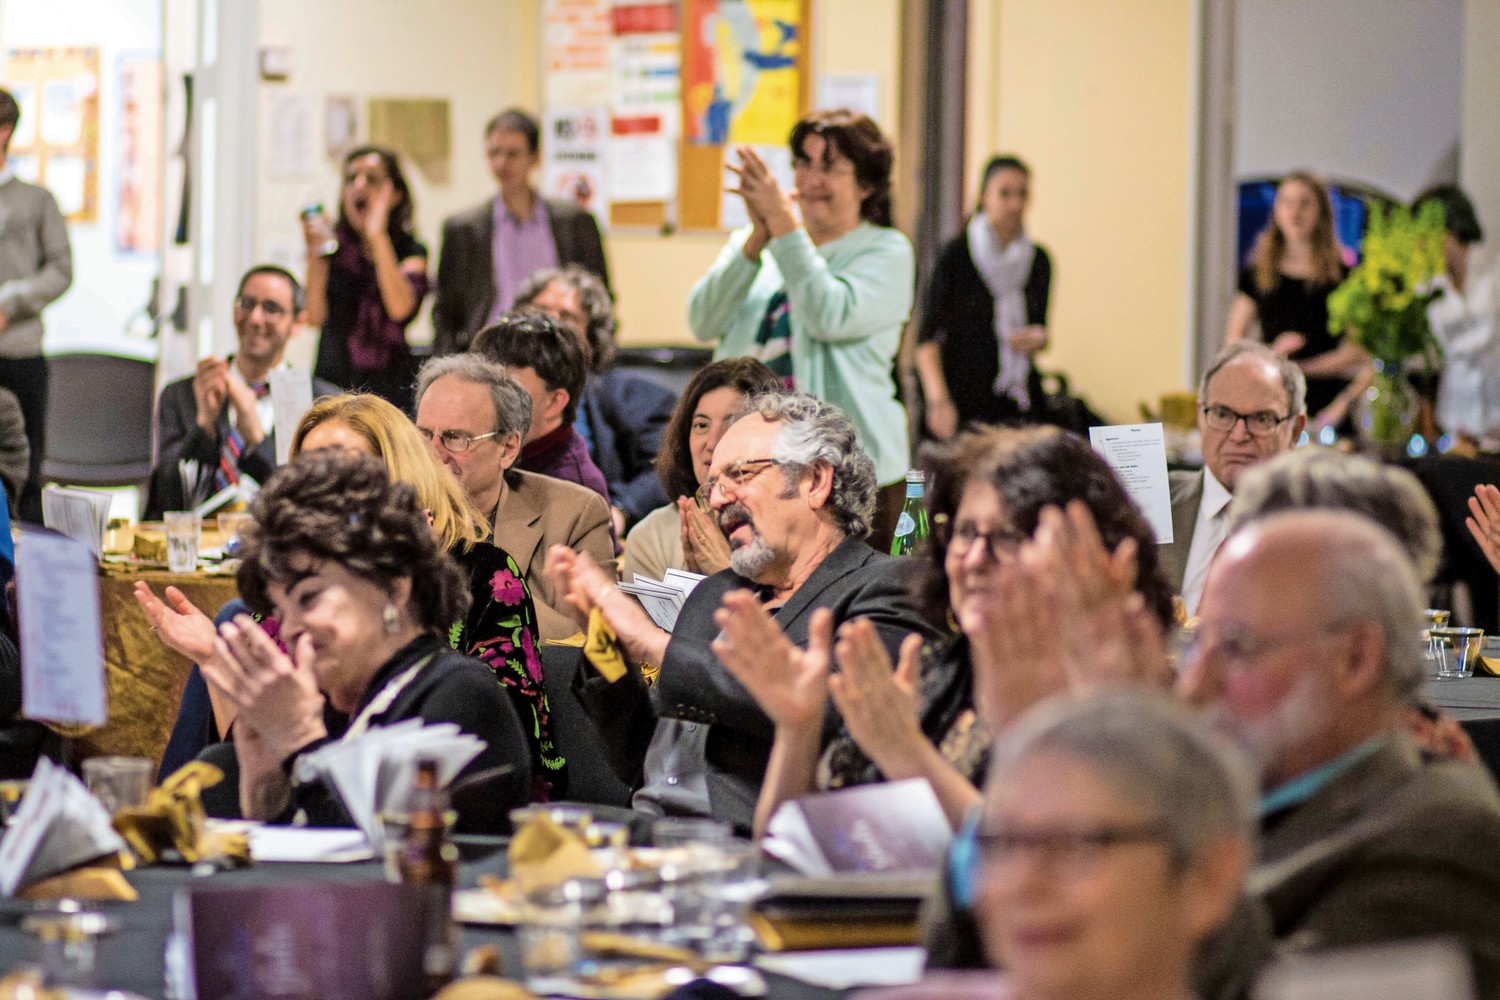 Rabbi Linda Shriner-Cahn receives an ovation from the assembled audience. Shriner-Cahn, who has served as the Congregation Tehillah's rabbi for nearly the past decade, was honored during the congregation's annual gala at The Riverdale Y.